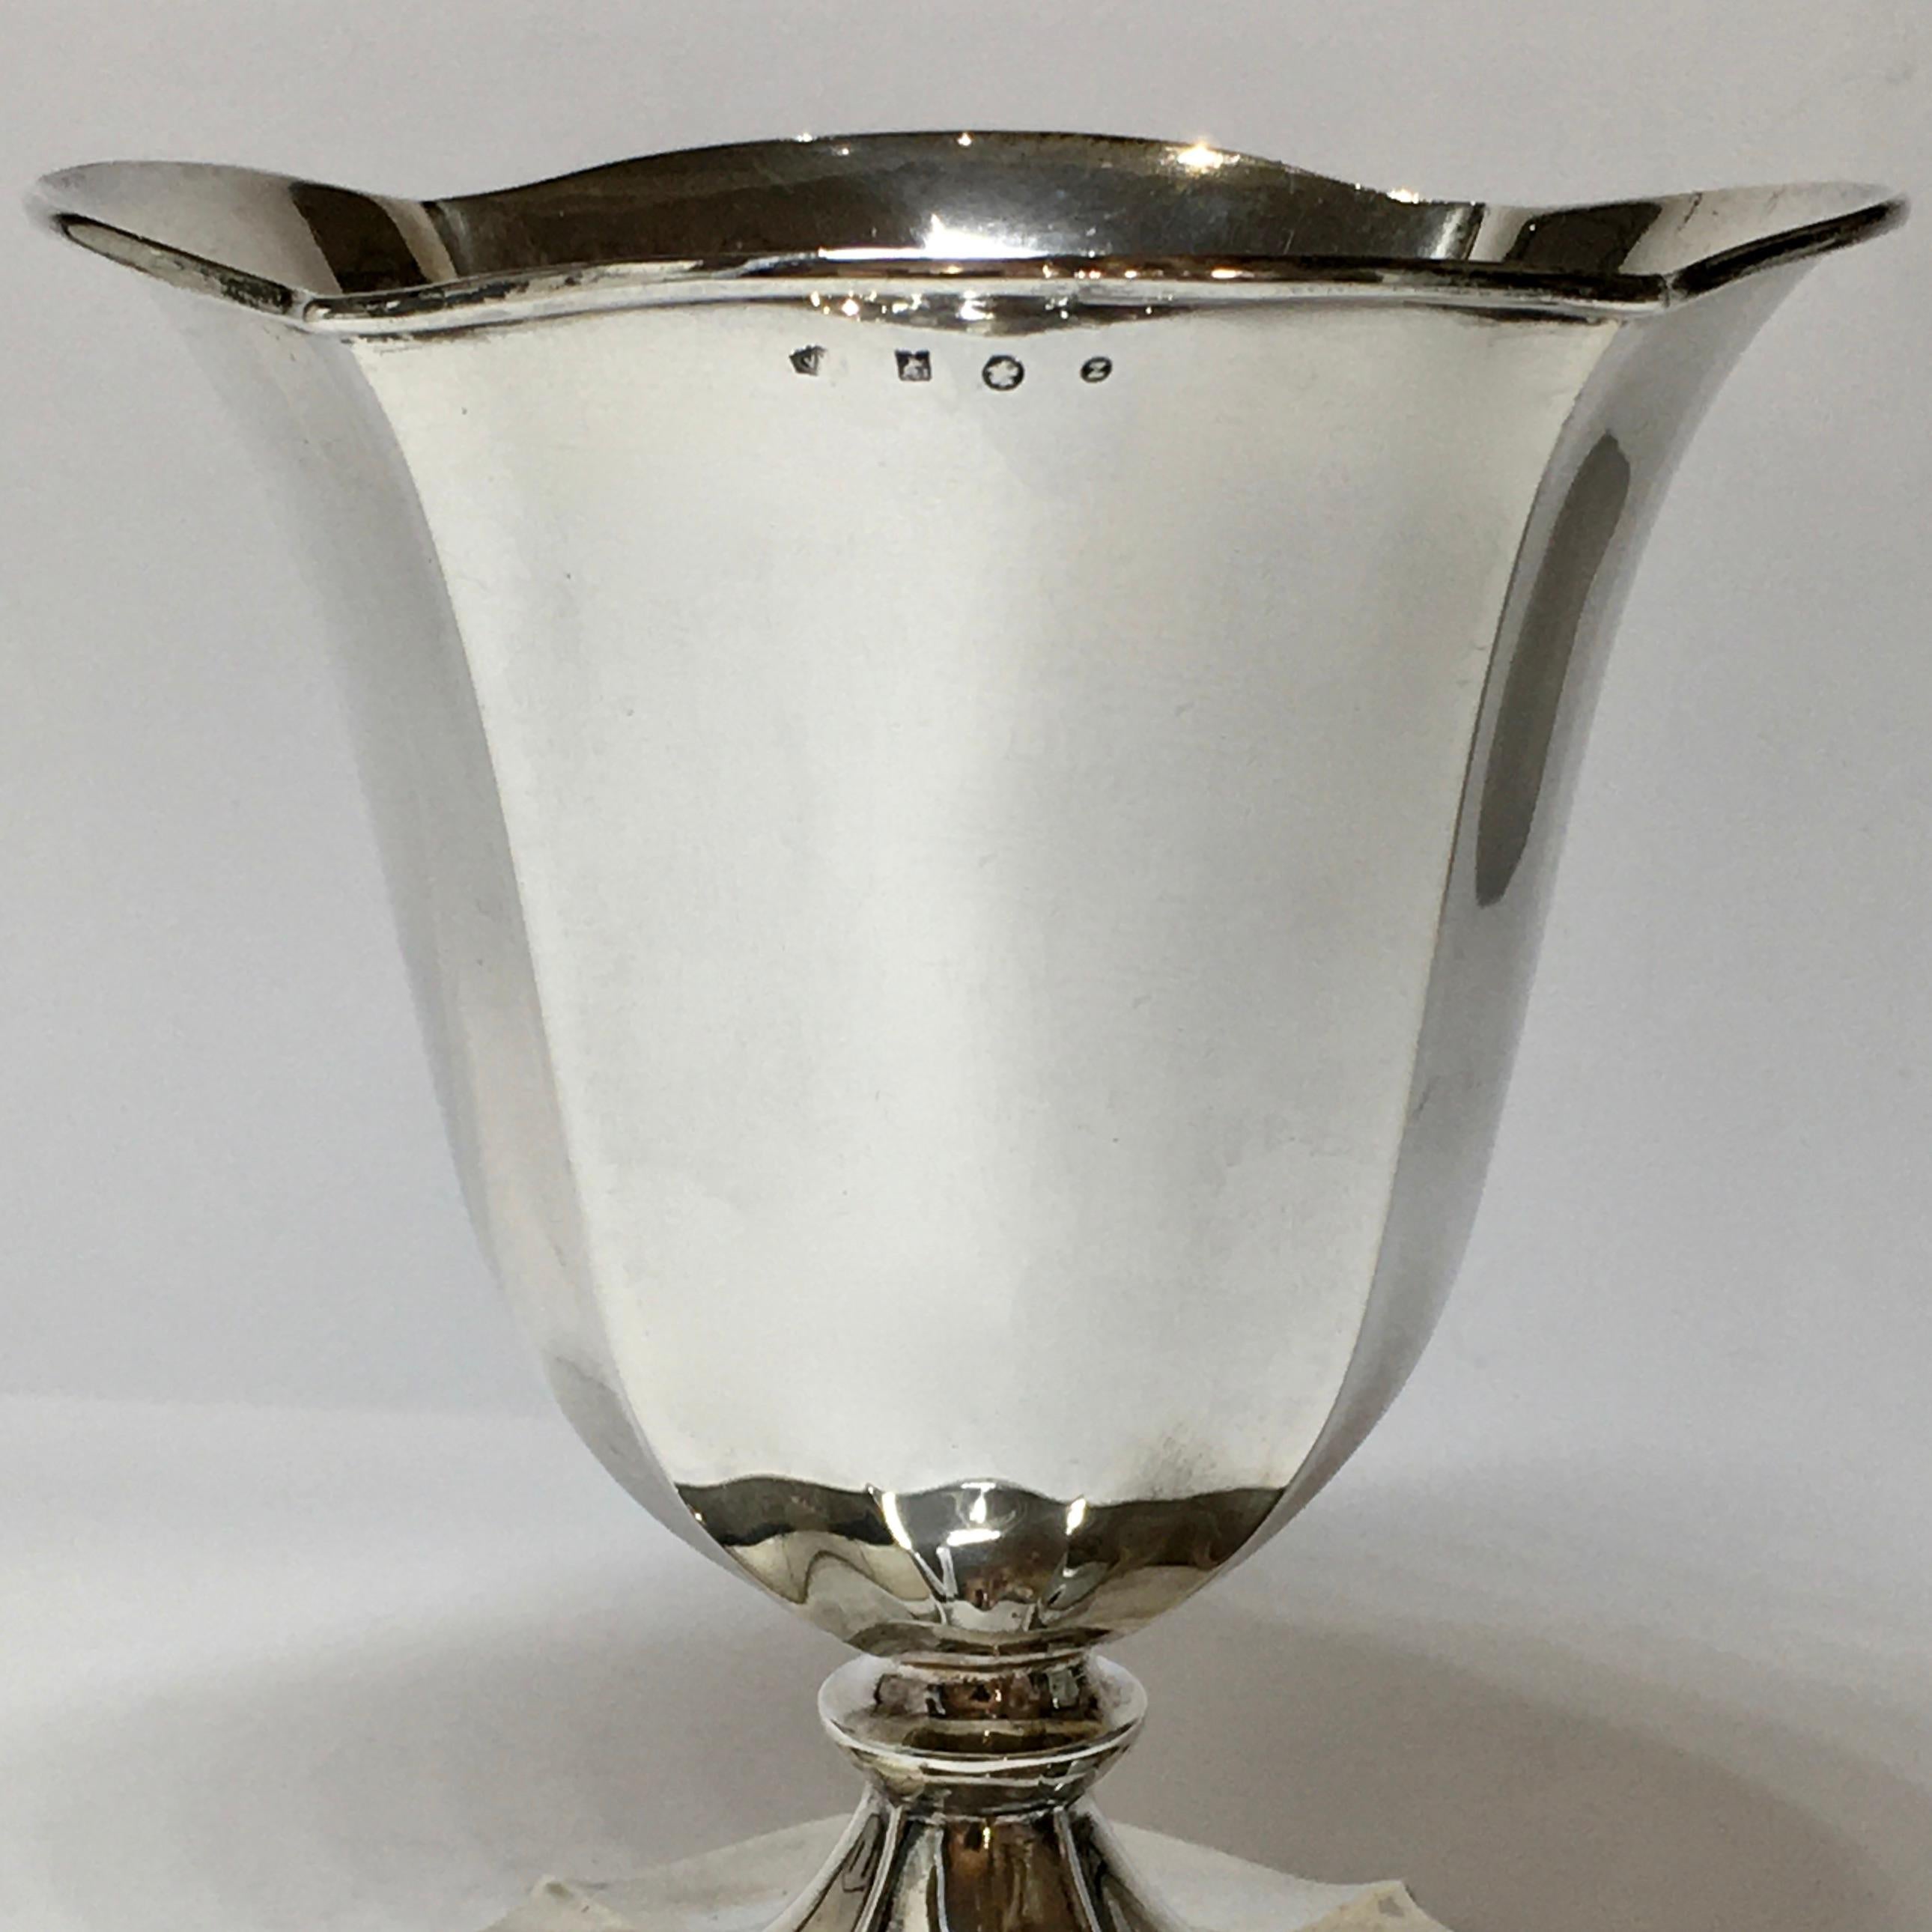 Silver Flower Vase, manufactured in 1934 by Van Kempen, Zeist, The Netherlands

Van Kempen is a well-known Dutch Gold and Silver Factory in Zeist / Voorschoten. The maker's mark is a large G with the vk in the contour of the G.

When Antonius